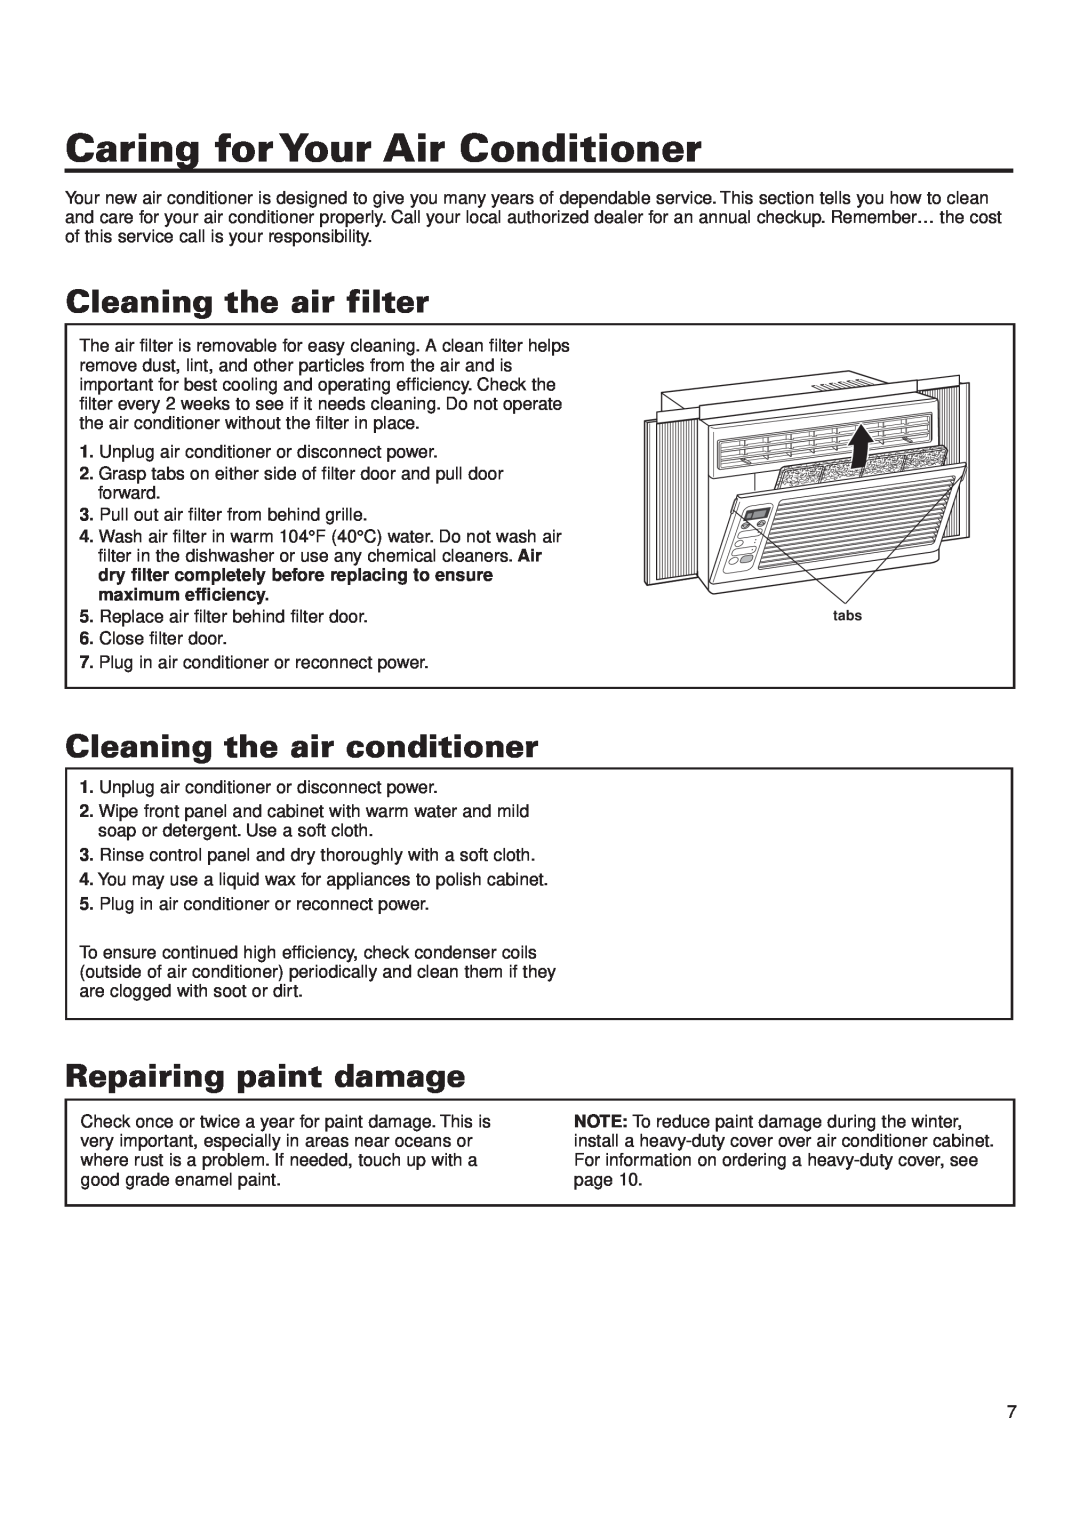 Whirlpool ACQ052PK0 Caring for Your Air Conditioner, Cleaning the air filter, Cleaning the air conditioner 